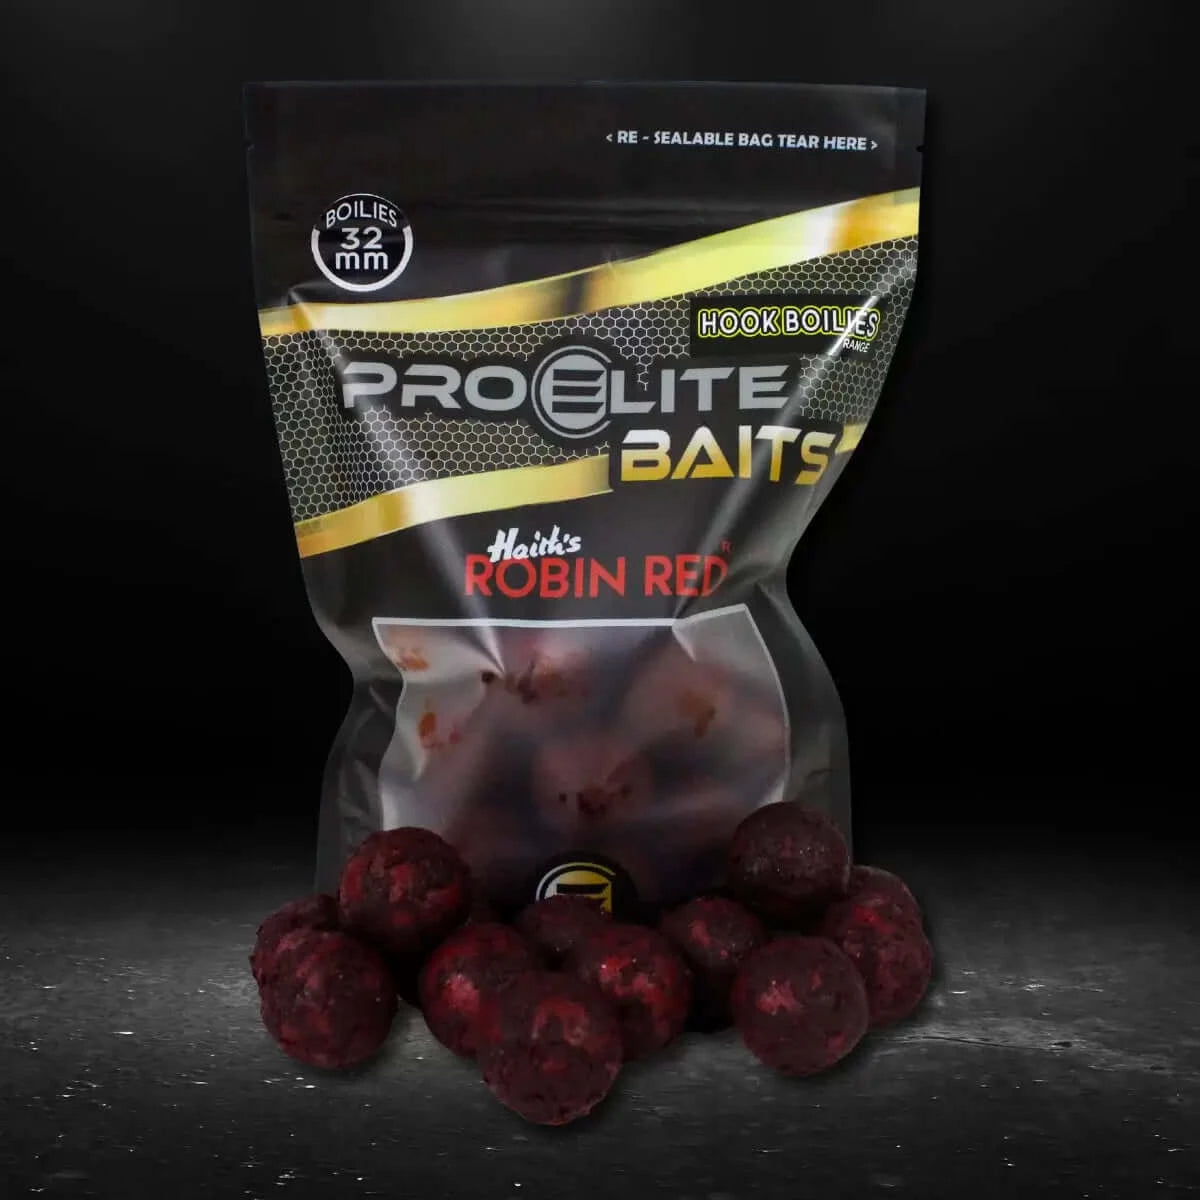 Boilies Pro Elite Baits Gold Robin Red 32 mm